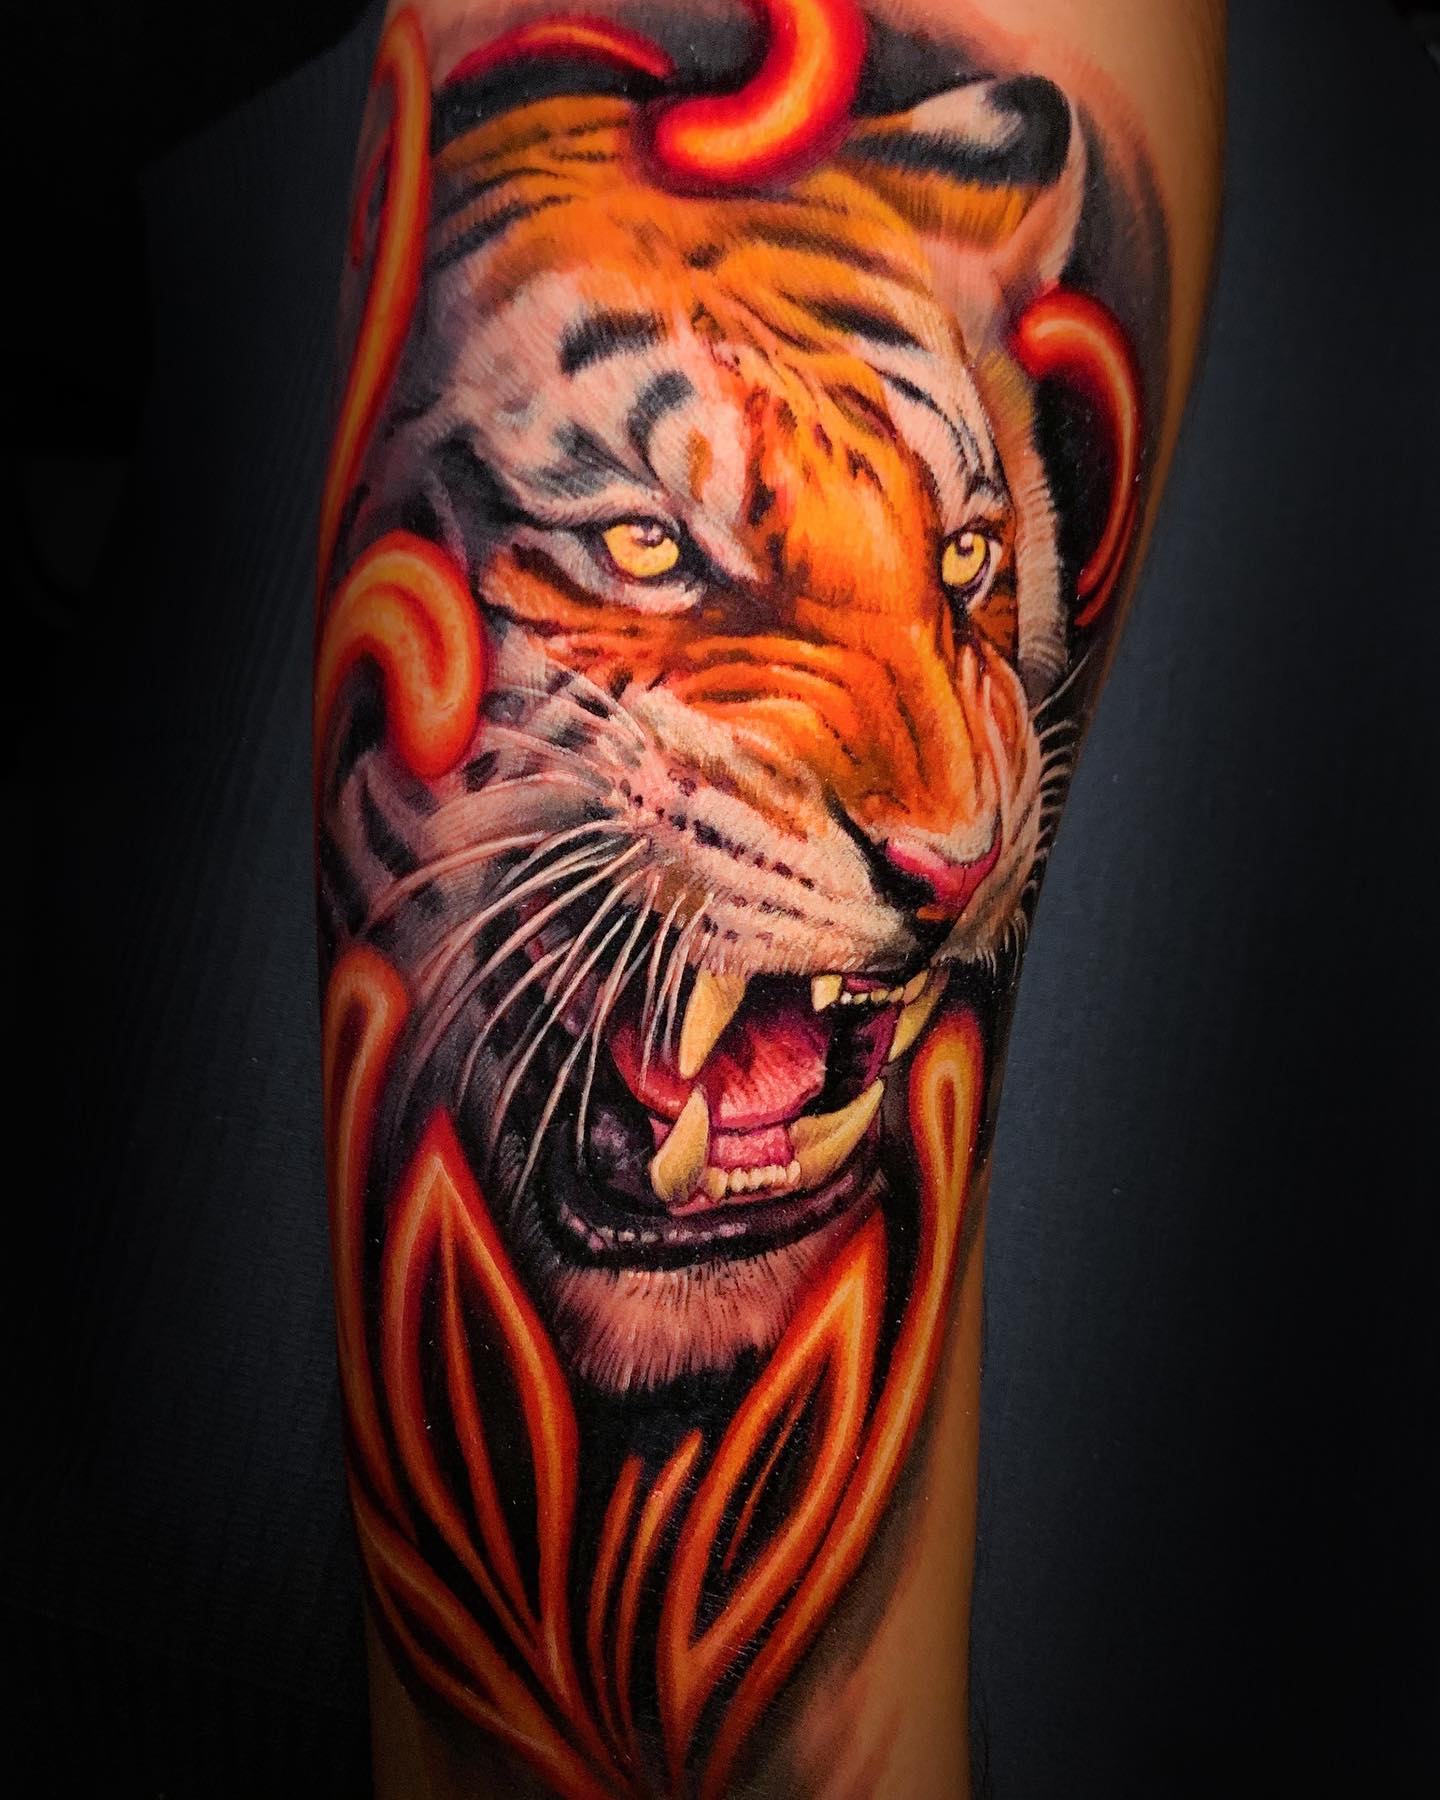 Thank you @_emma_j_smith_ for always getting cool tattoos from me! #tiger  #tigertattoo #traditional #traditionaltattoo #traditionaltiger ... |  Instagram